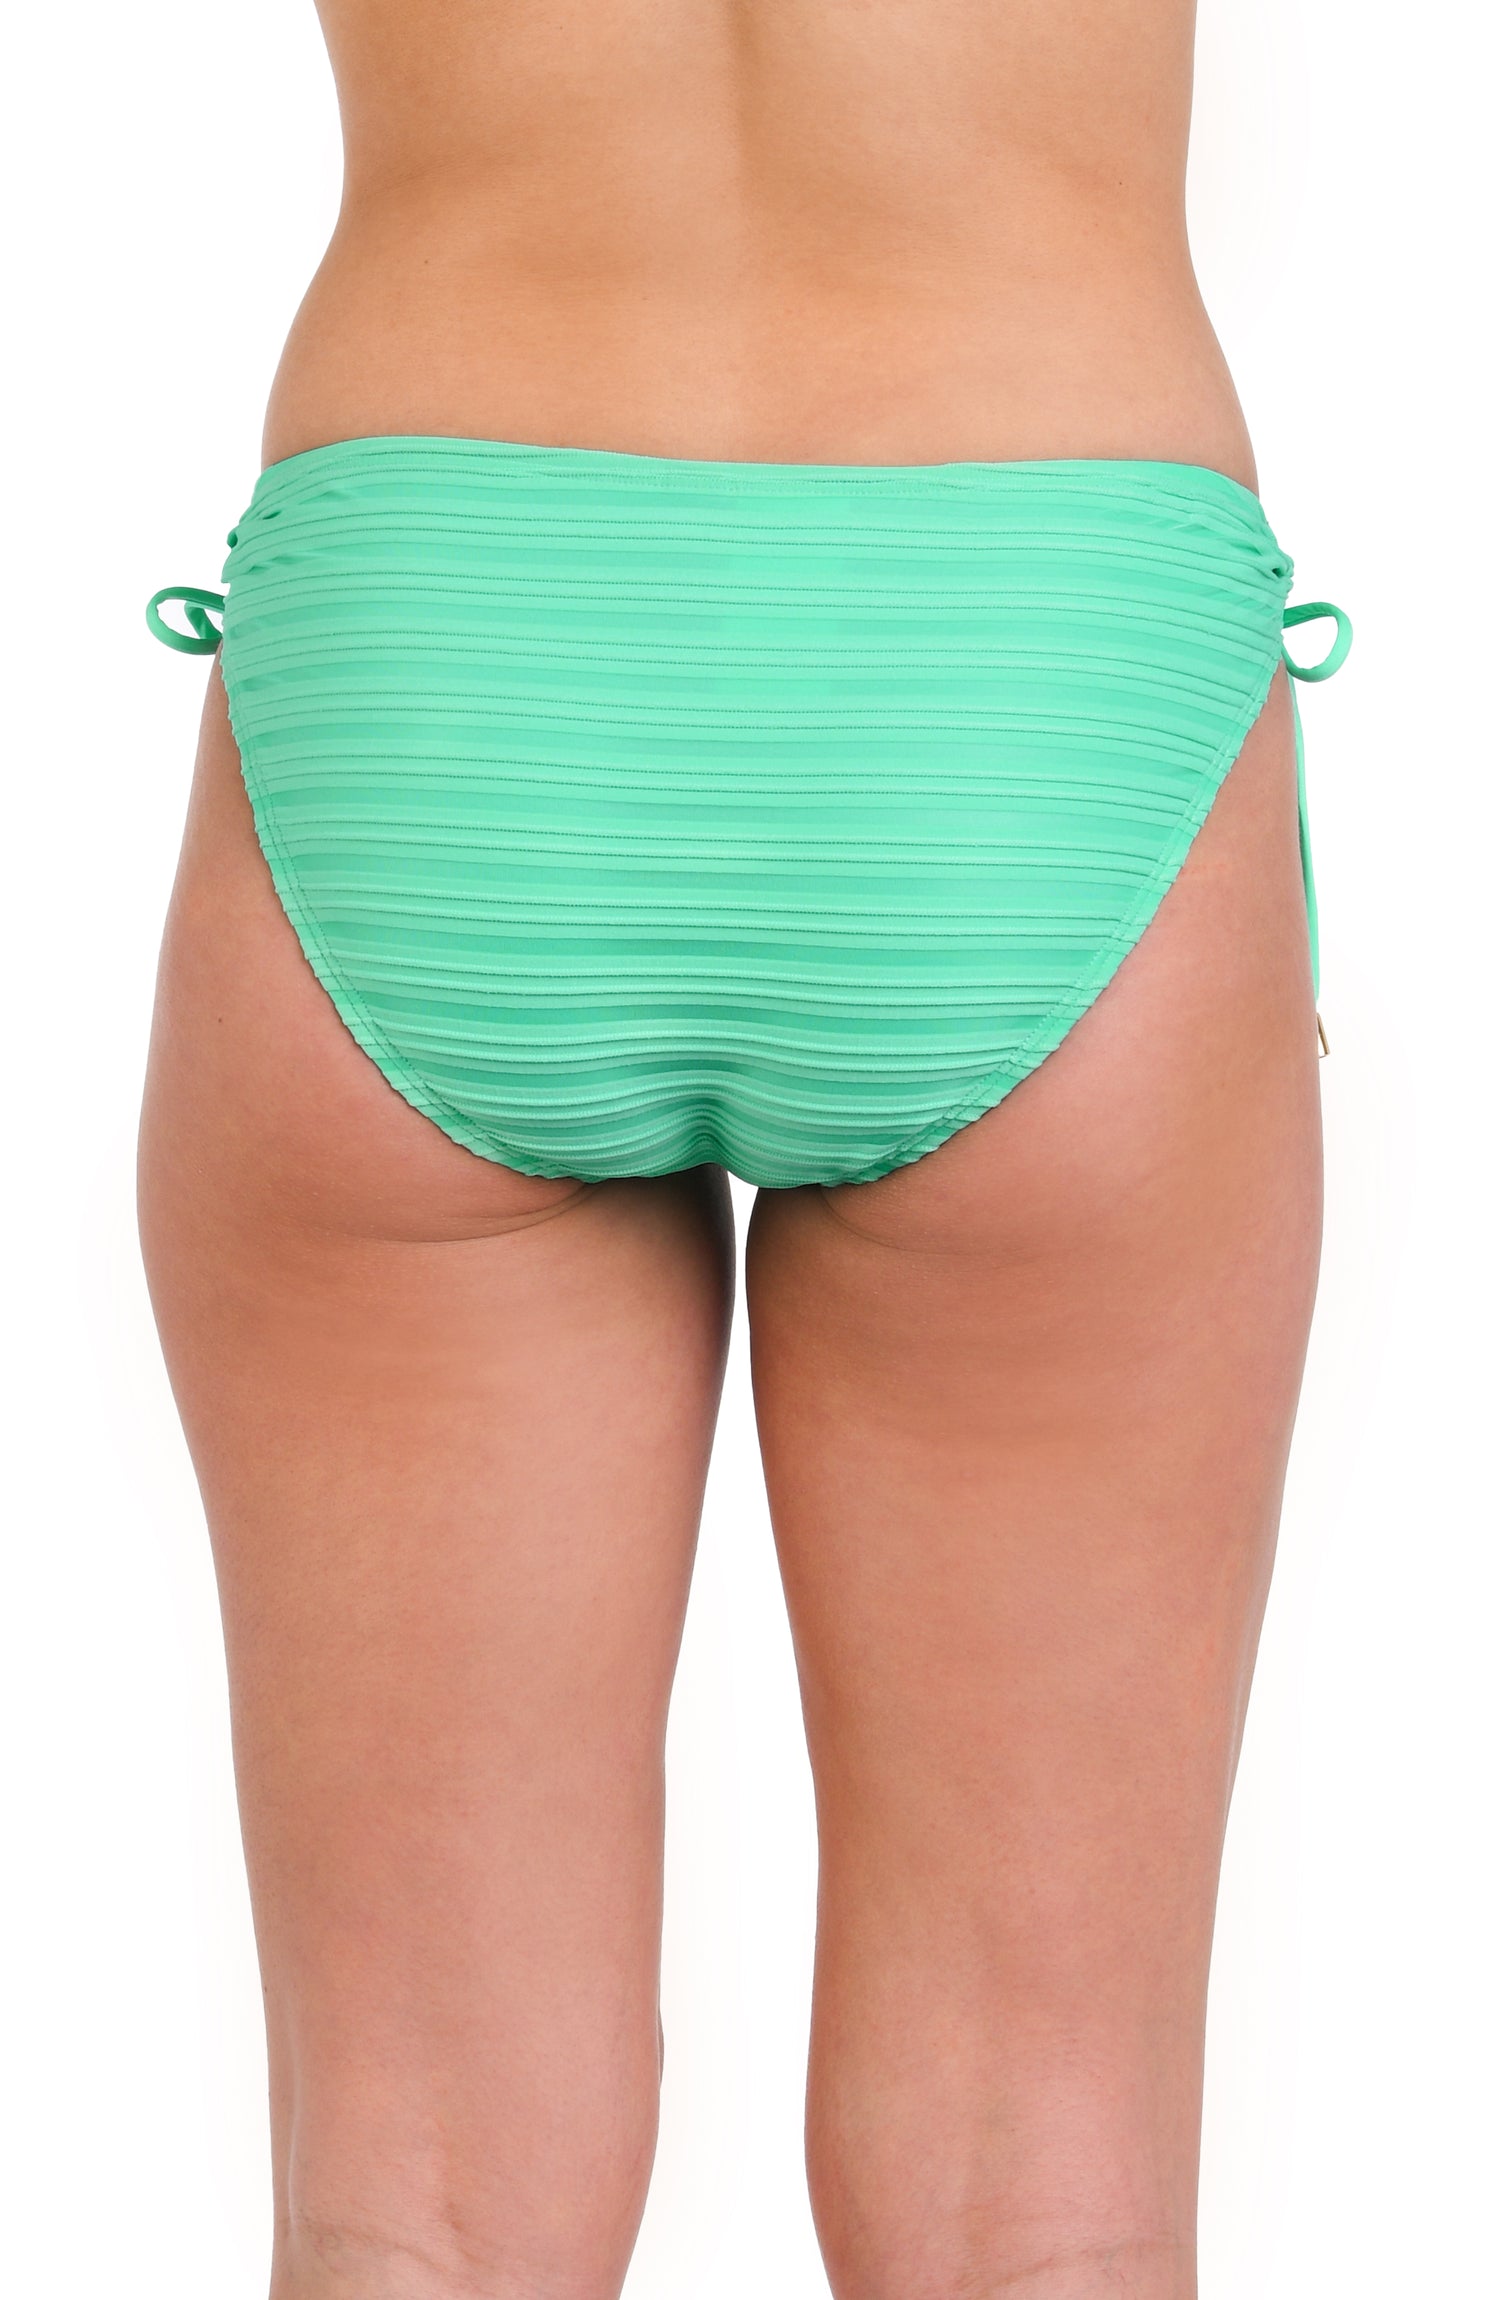 Model is wearing a textured seafoam green colored side tie hipster bikini bottom with clean textured horizontal lines.